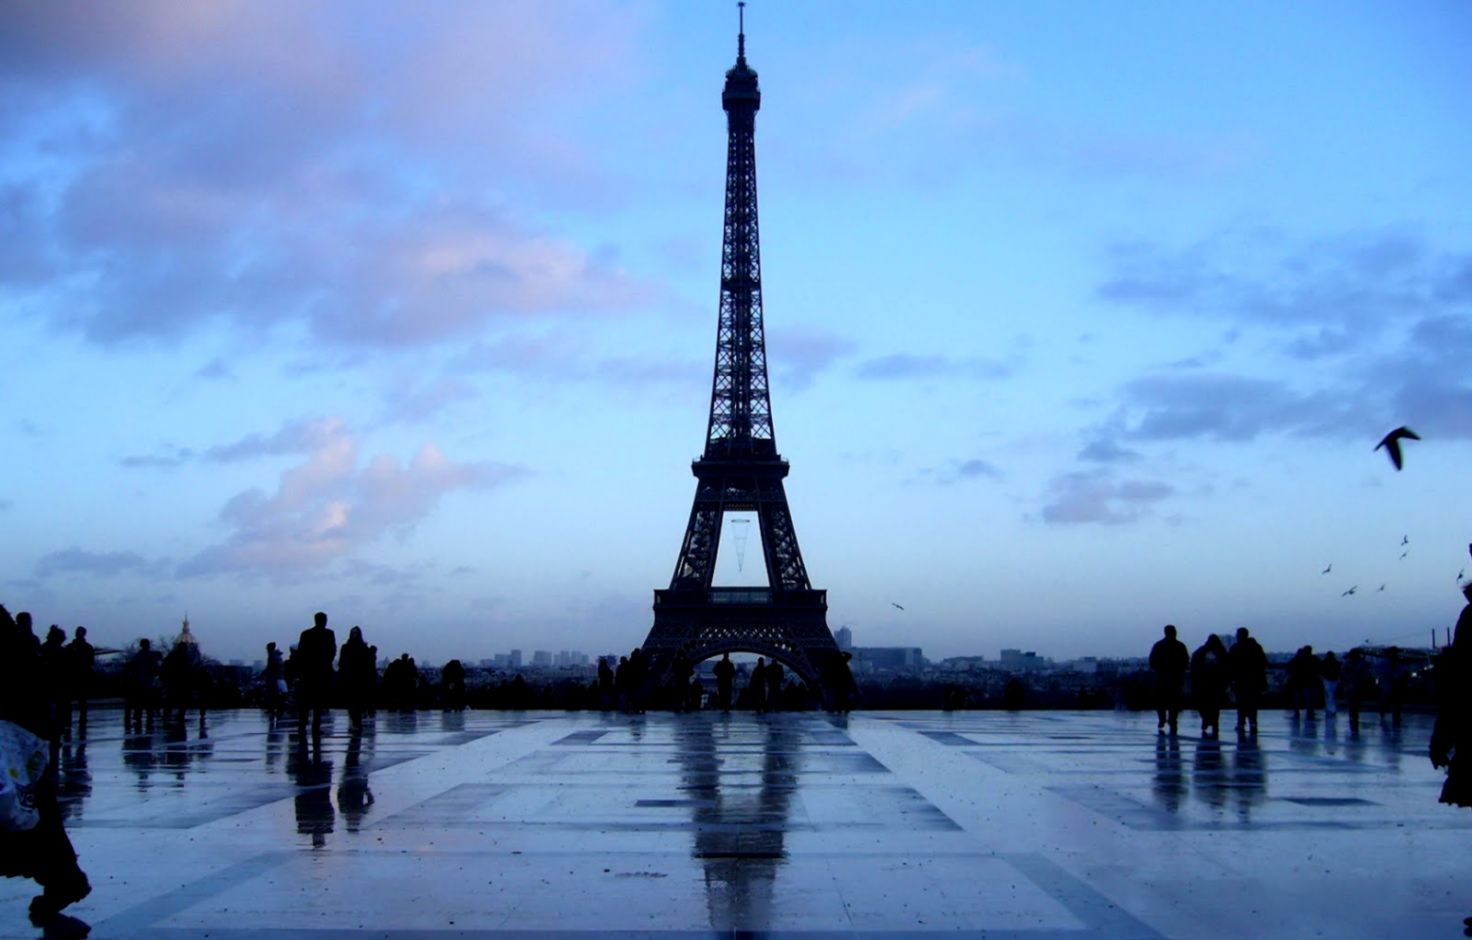 Free Hd Wallpapers Beautiful Places Of The World 2 - Eiffel Tower - HD Wallpaper 